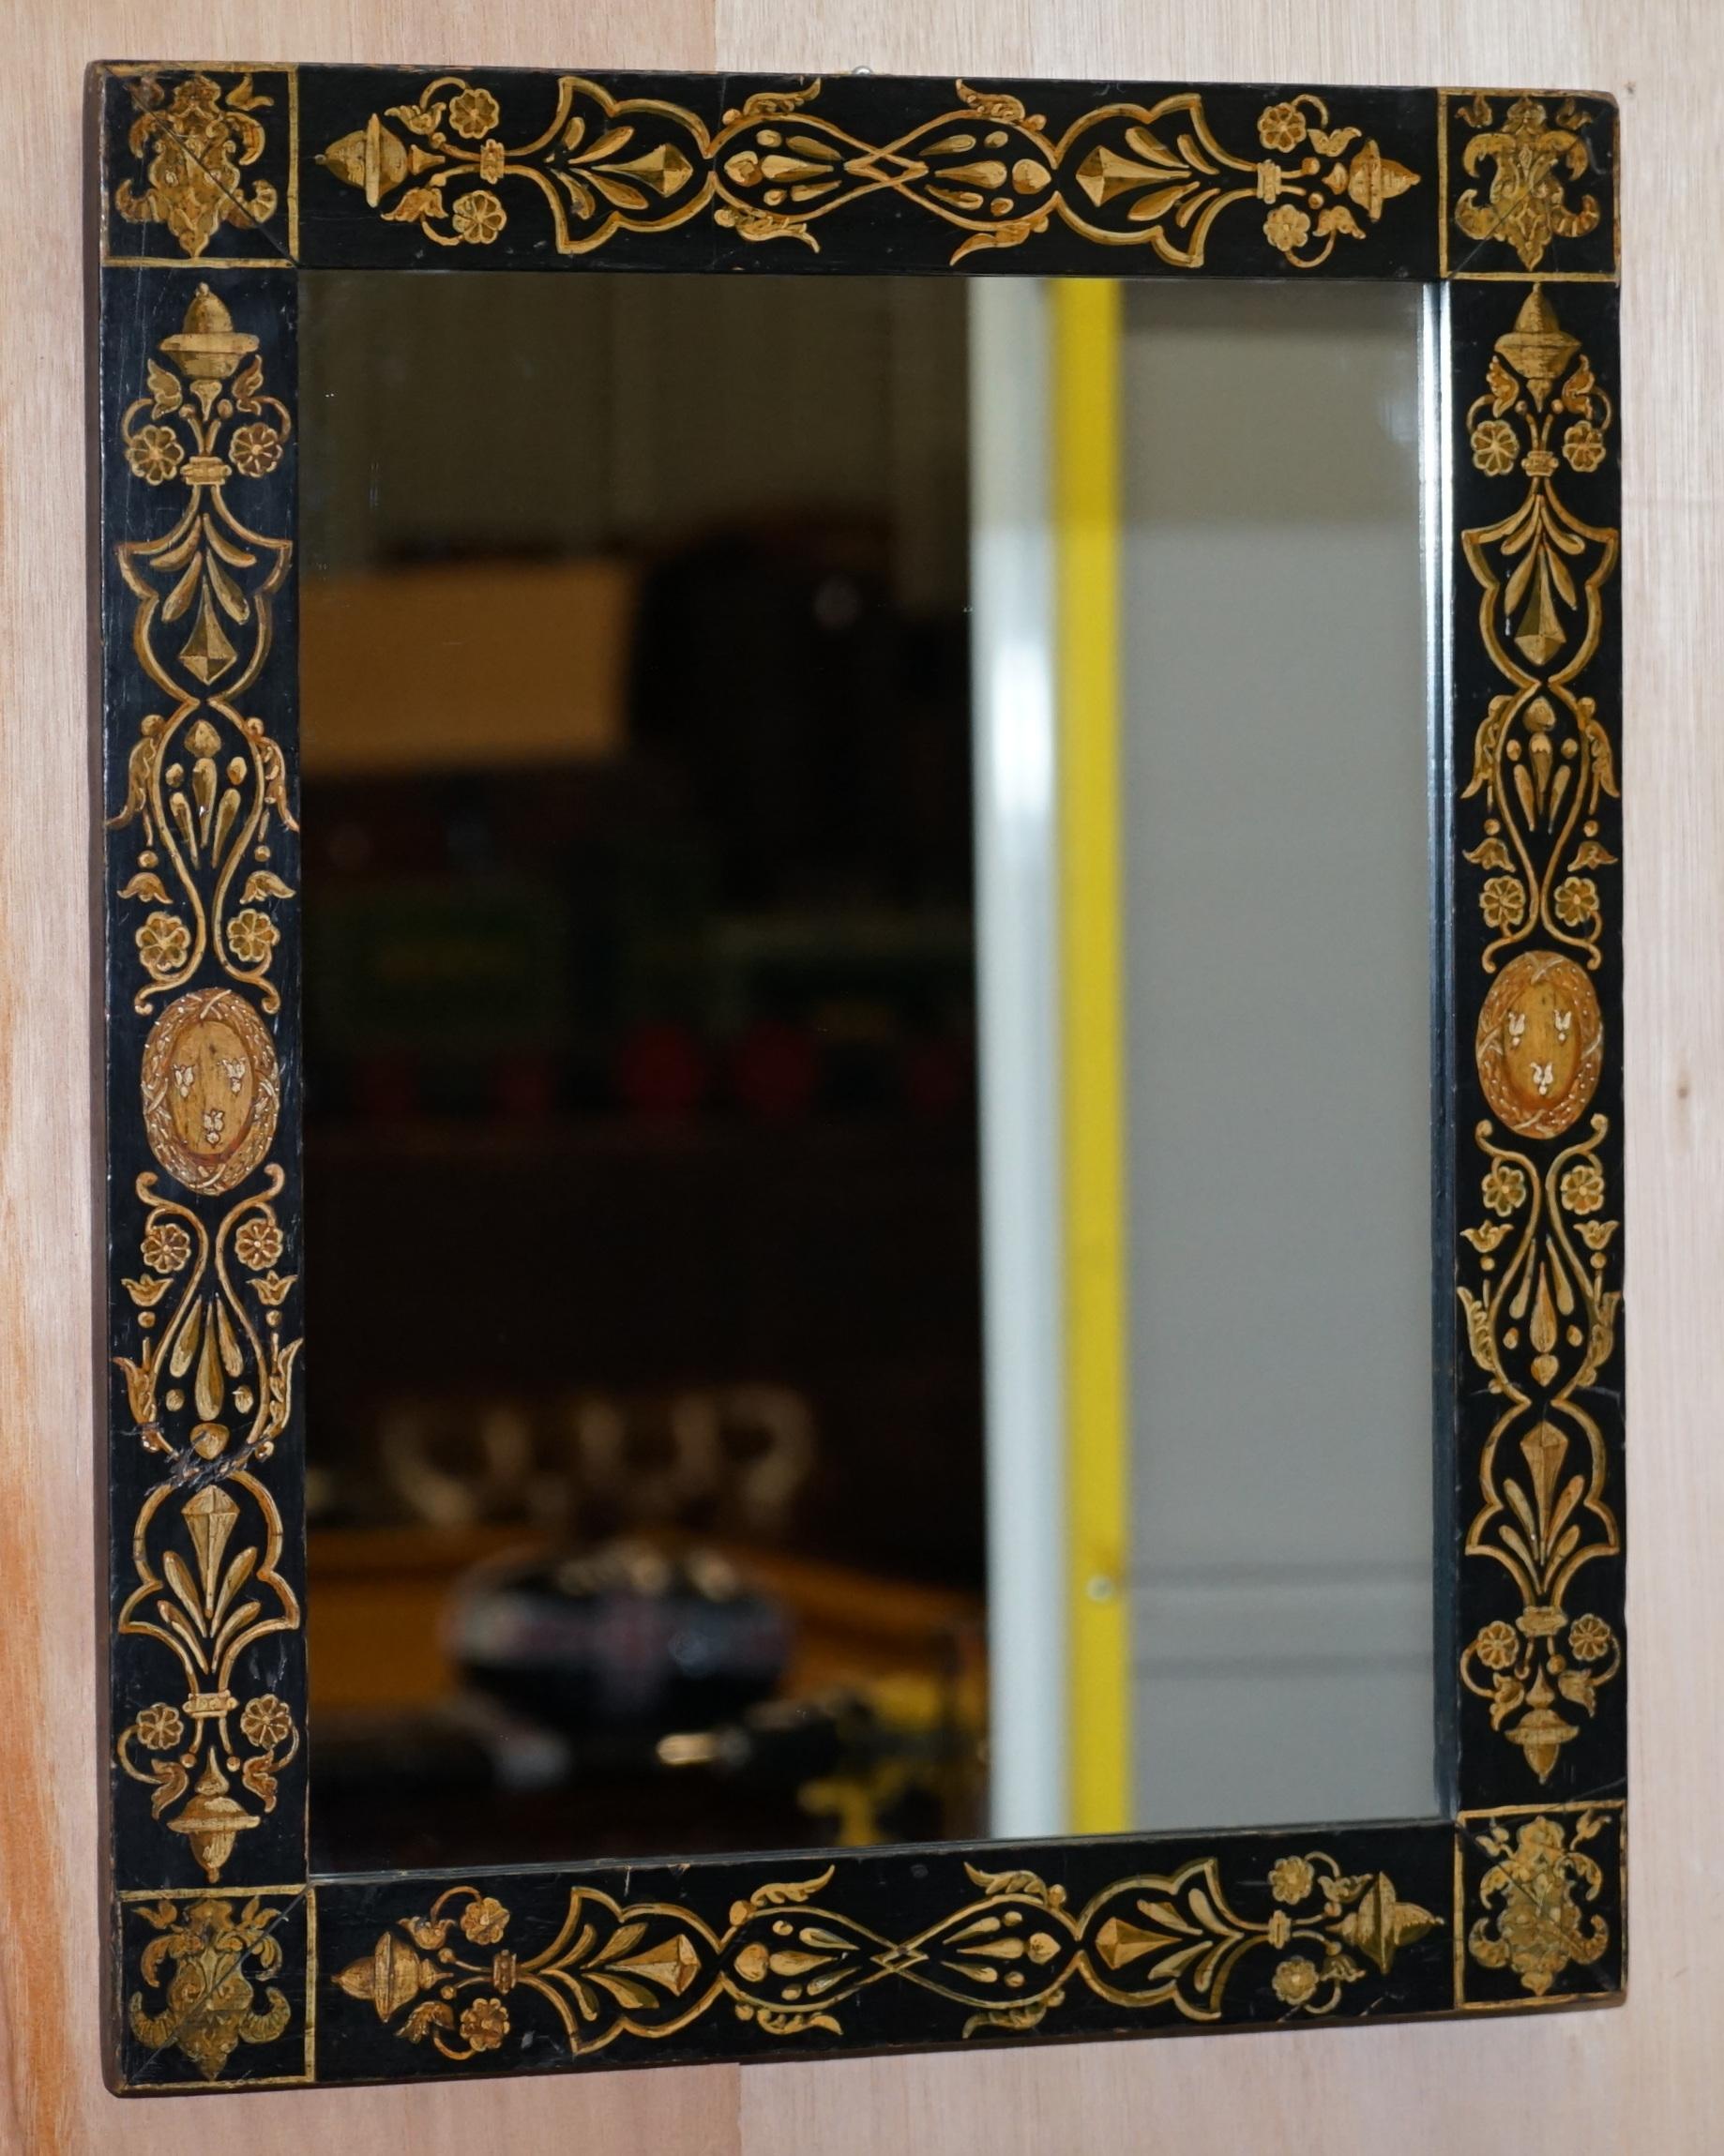 We are delighted to offer for sale this stunning circa 1840s hand painted Victorian mirror

A very good looking and well made mirror, it has a very Regency look and feel but I think its early Victorian 

This is a good decorative piece, the size